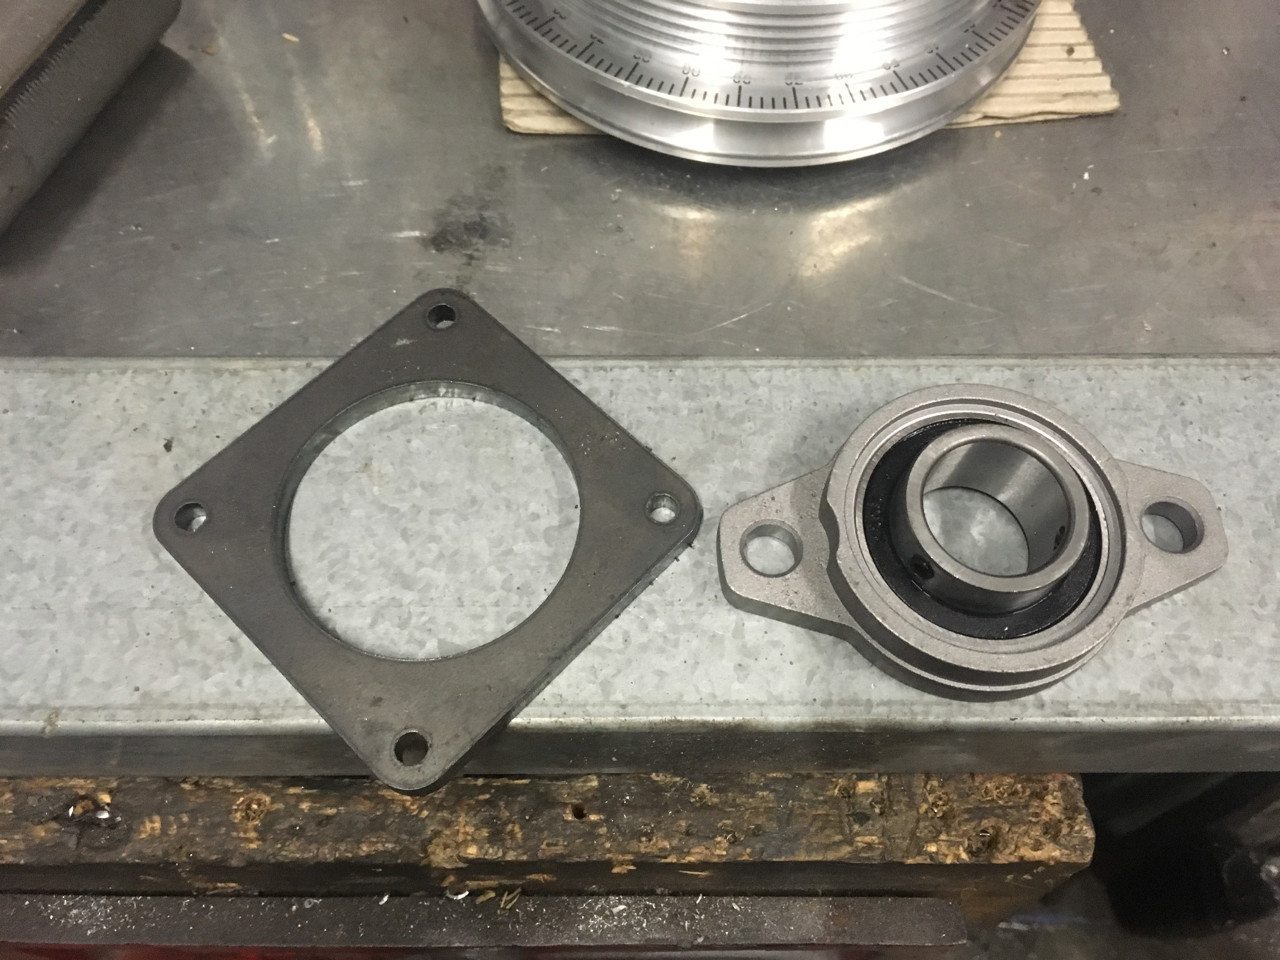 mounting plate - I already have these plates which are the same diameter